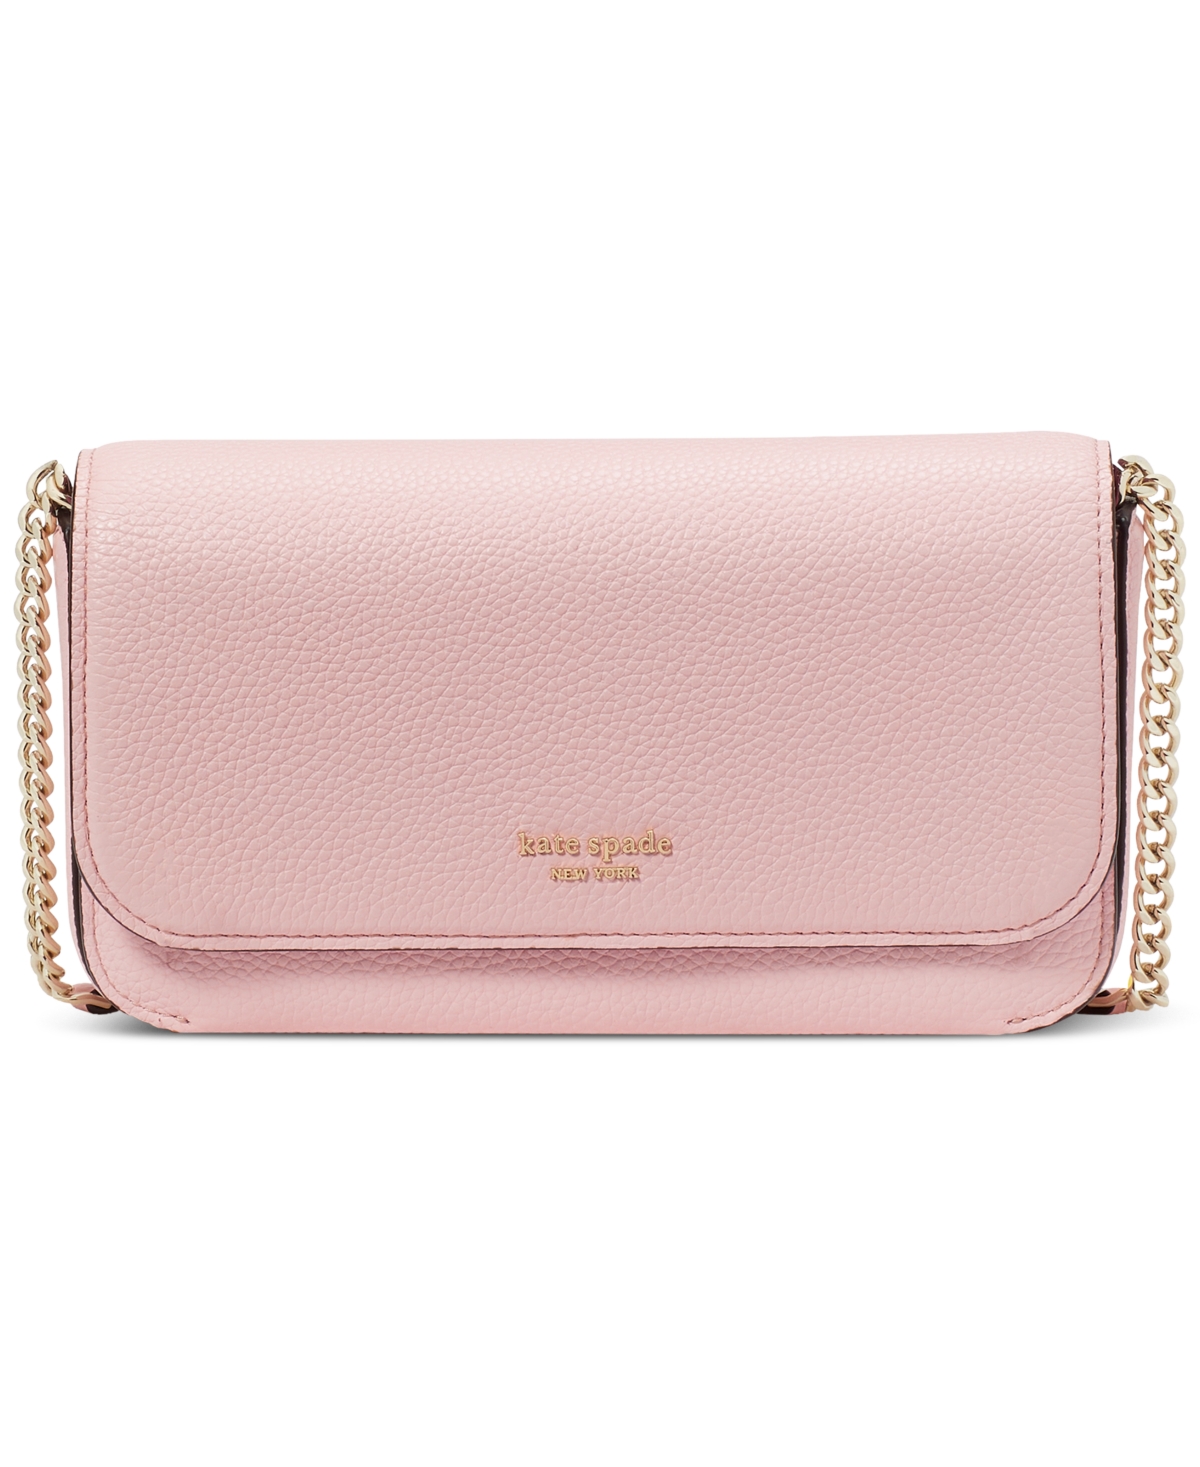 Kate Spade New York Ava Pebbled Leather Flap Chain Wallet In Crepe Pink